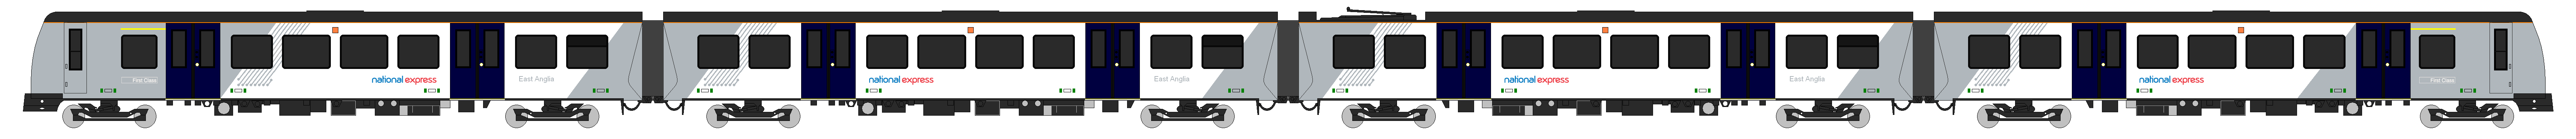 Class_360_National_Express_East_Anglia_Diagram.PNG